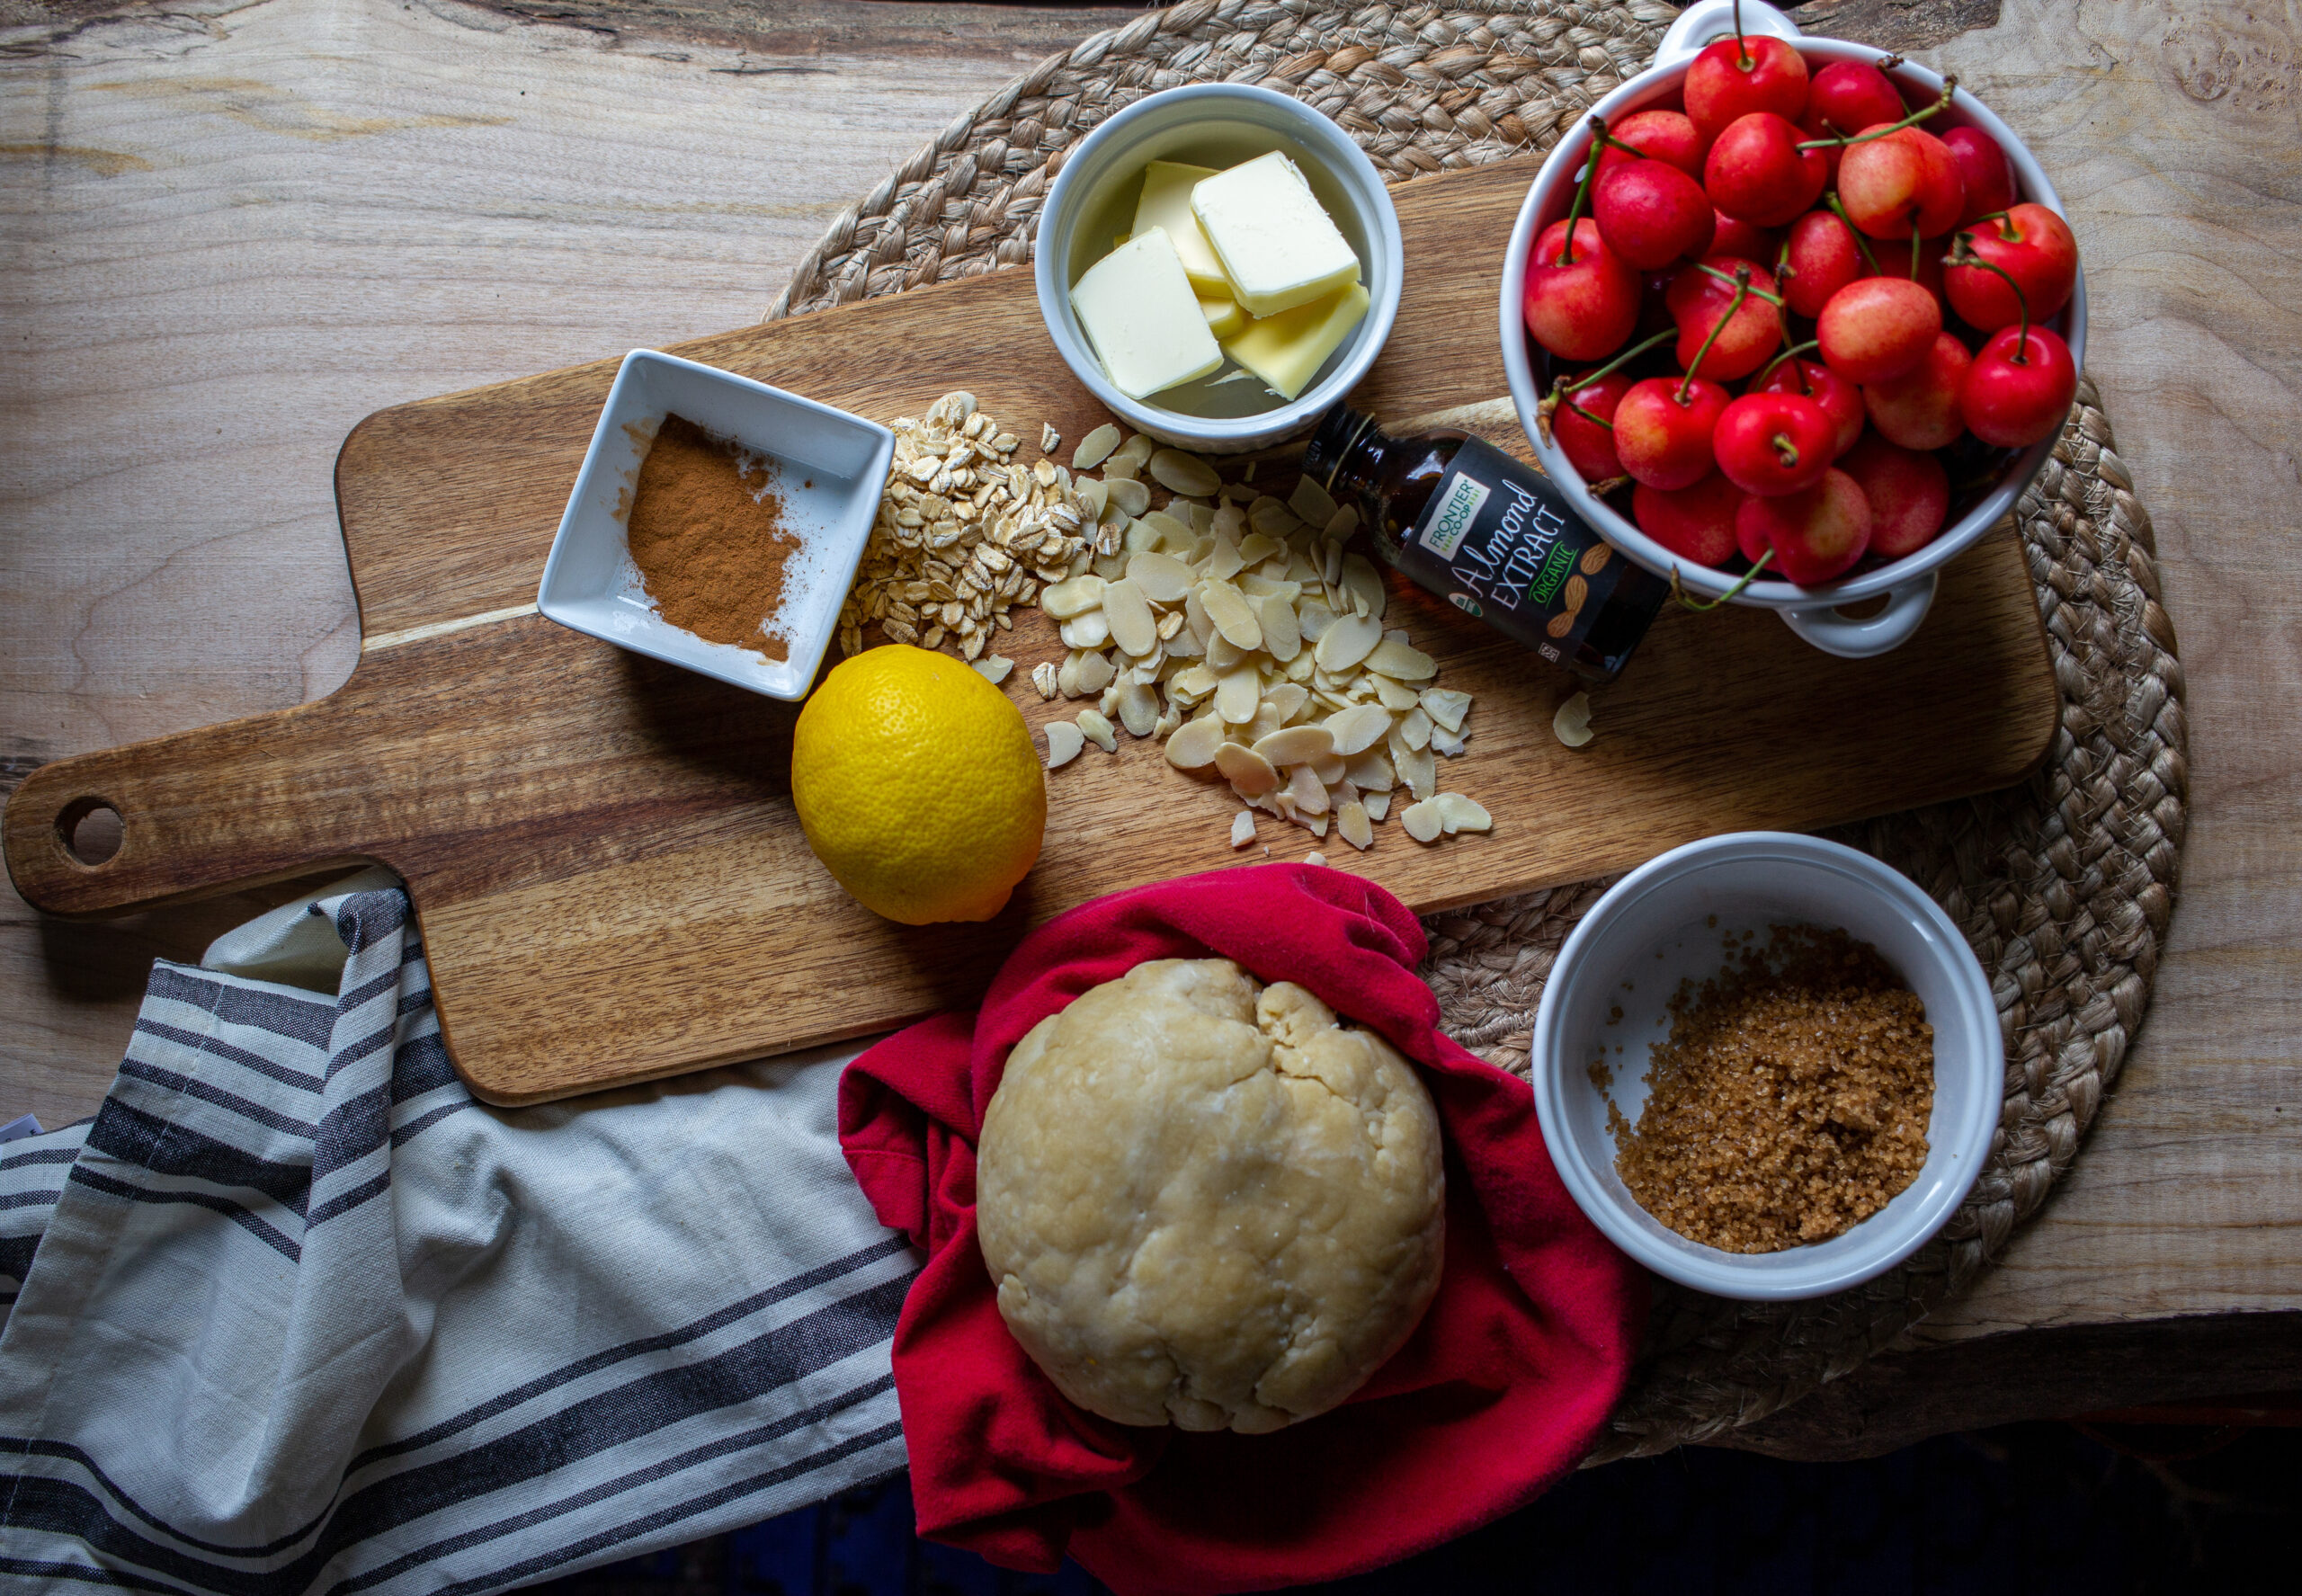 An assortment of ingredients including bowls of cherries, sugar, butter, lemon, a dough ball, and oats scattered on a wood board.